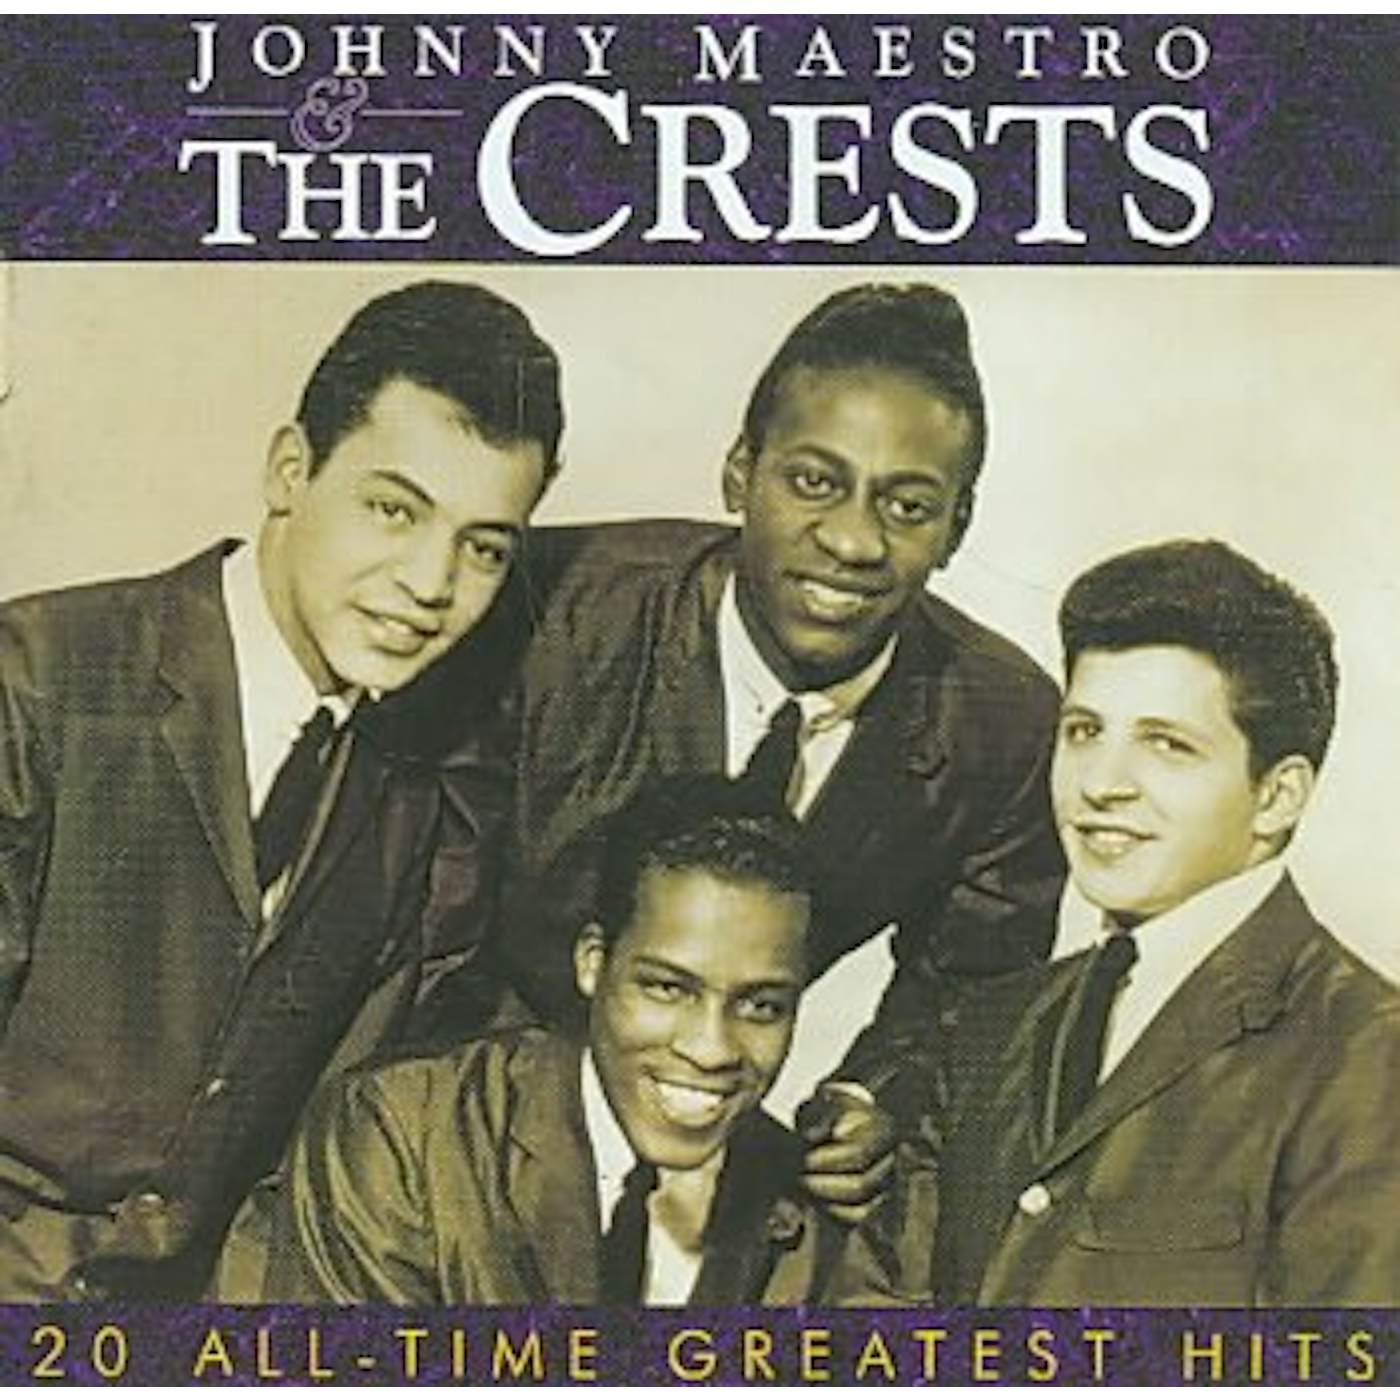 Johnny Maestro & The Crests - 20 All-Time Greatest Hits CD